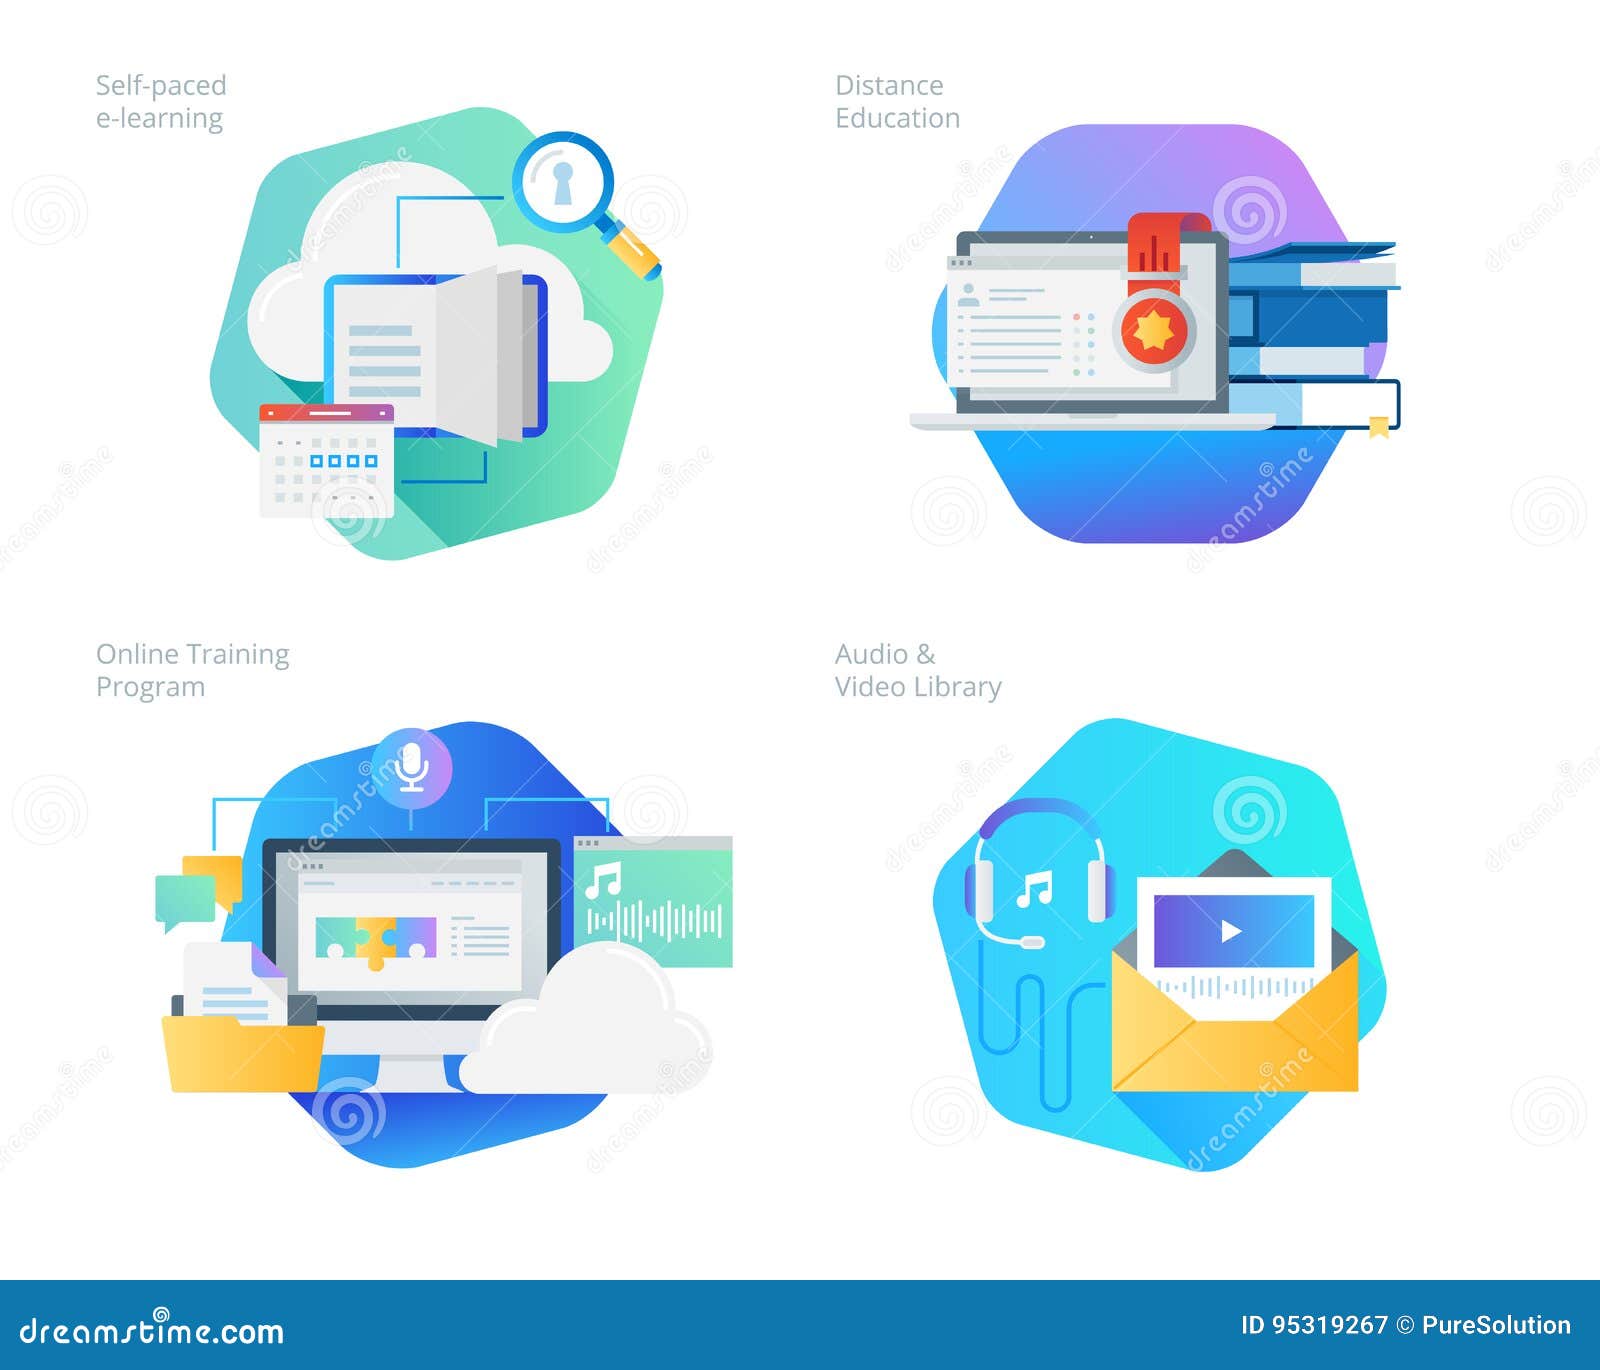 Download Material Design Icons Set For Distance Education, Audio ...